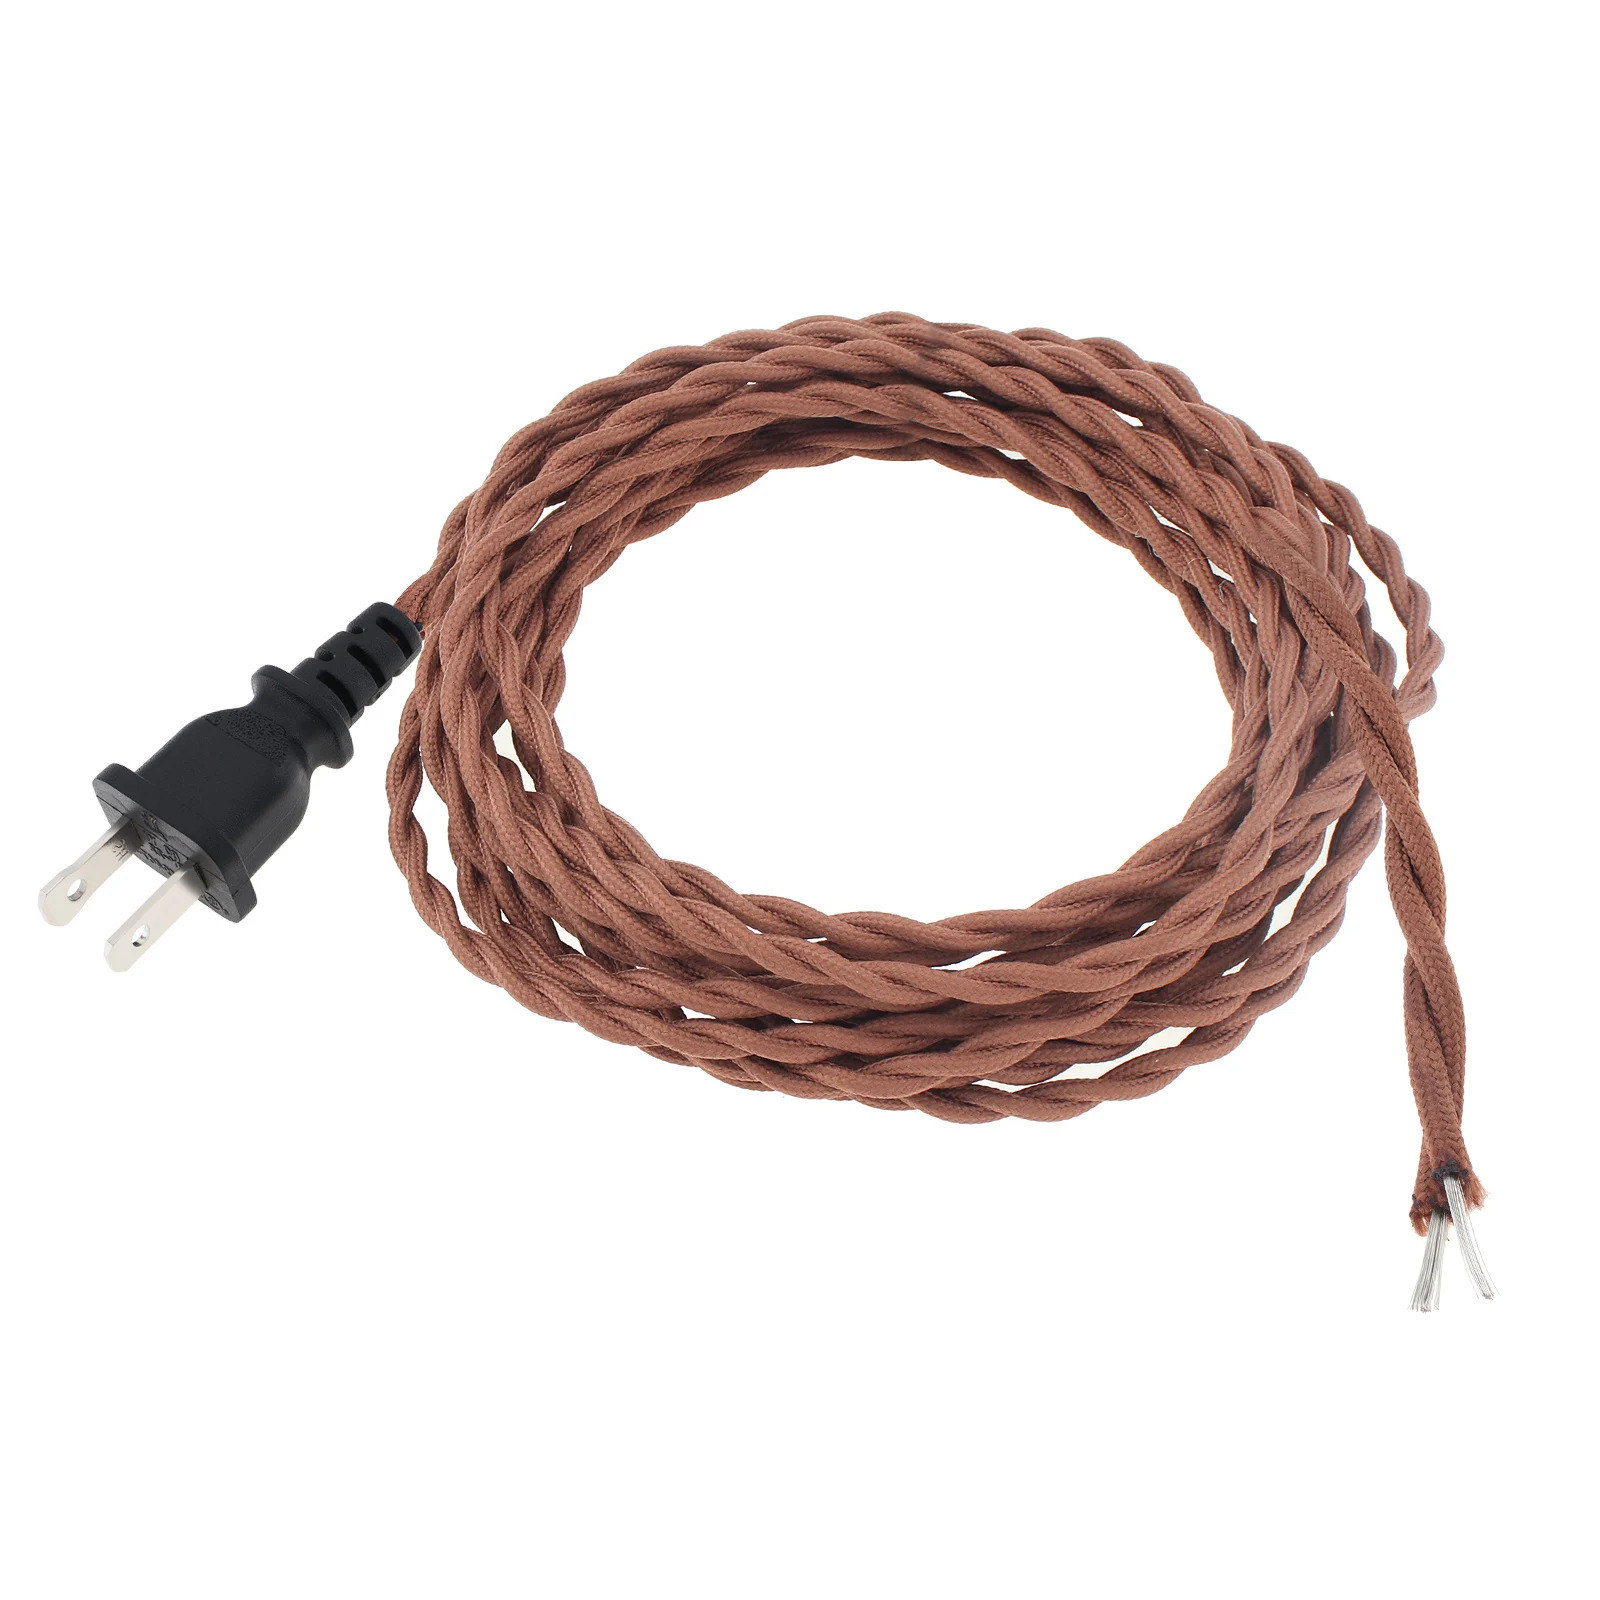 3.6M/12FT Twisted Cloth Covered Lamp Cord Replacement Extension Industrial for DIY Projects Retro Lamp with US End Plug